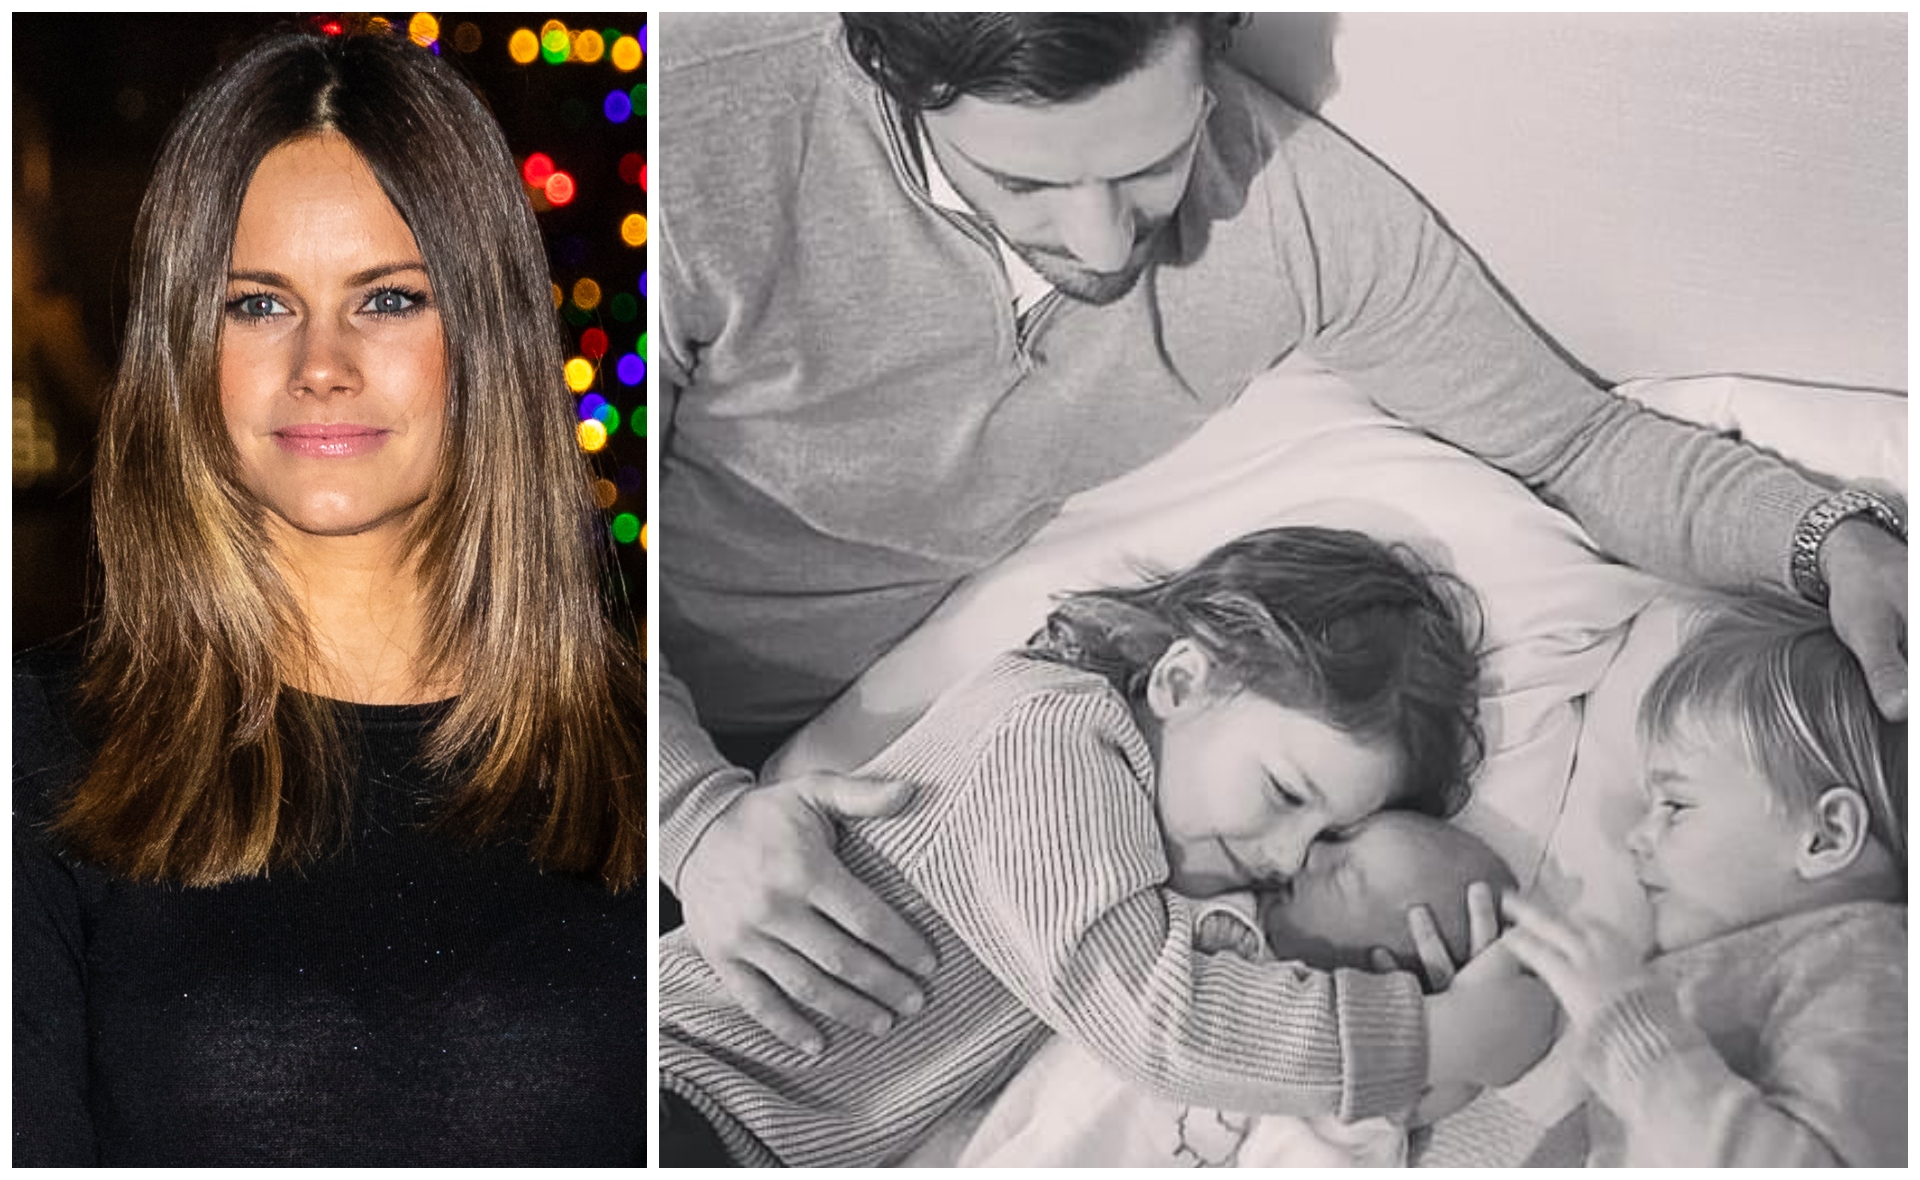 “Life has given me not just one but four beautiful Princes”: Princess Sofia of Sweden shares the first photos of her new family of five